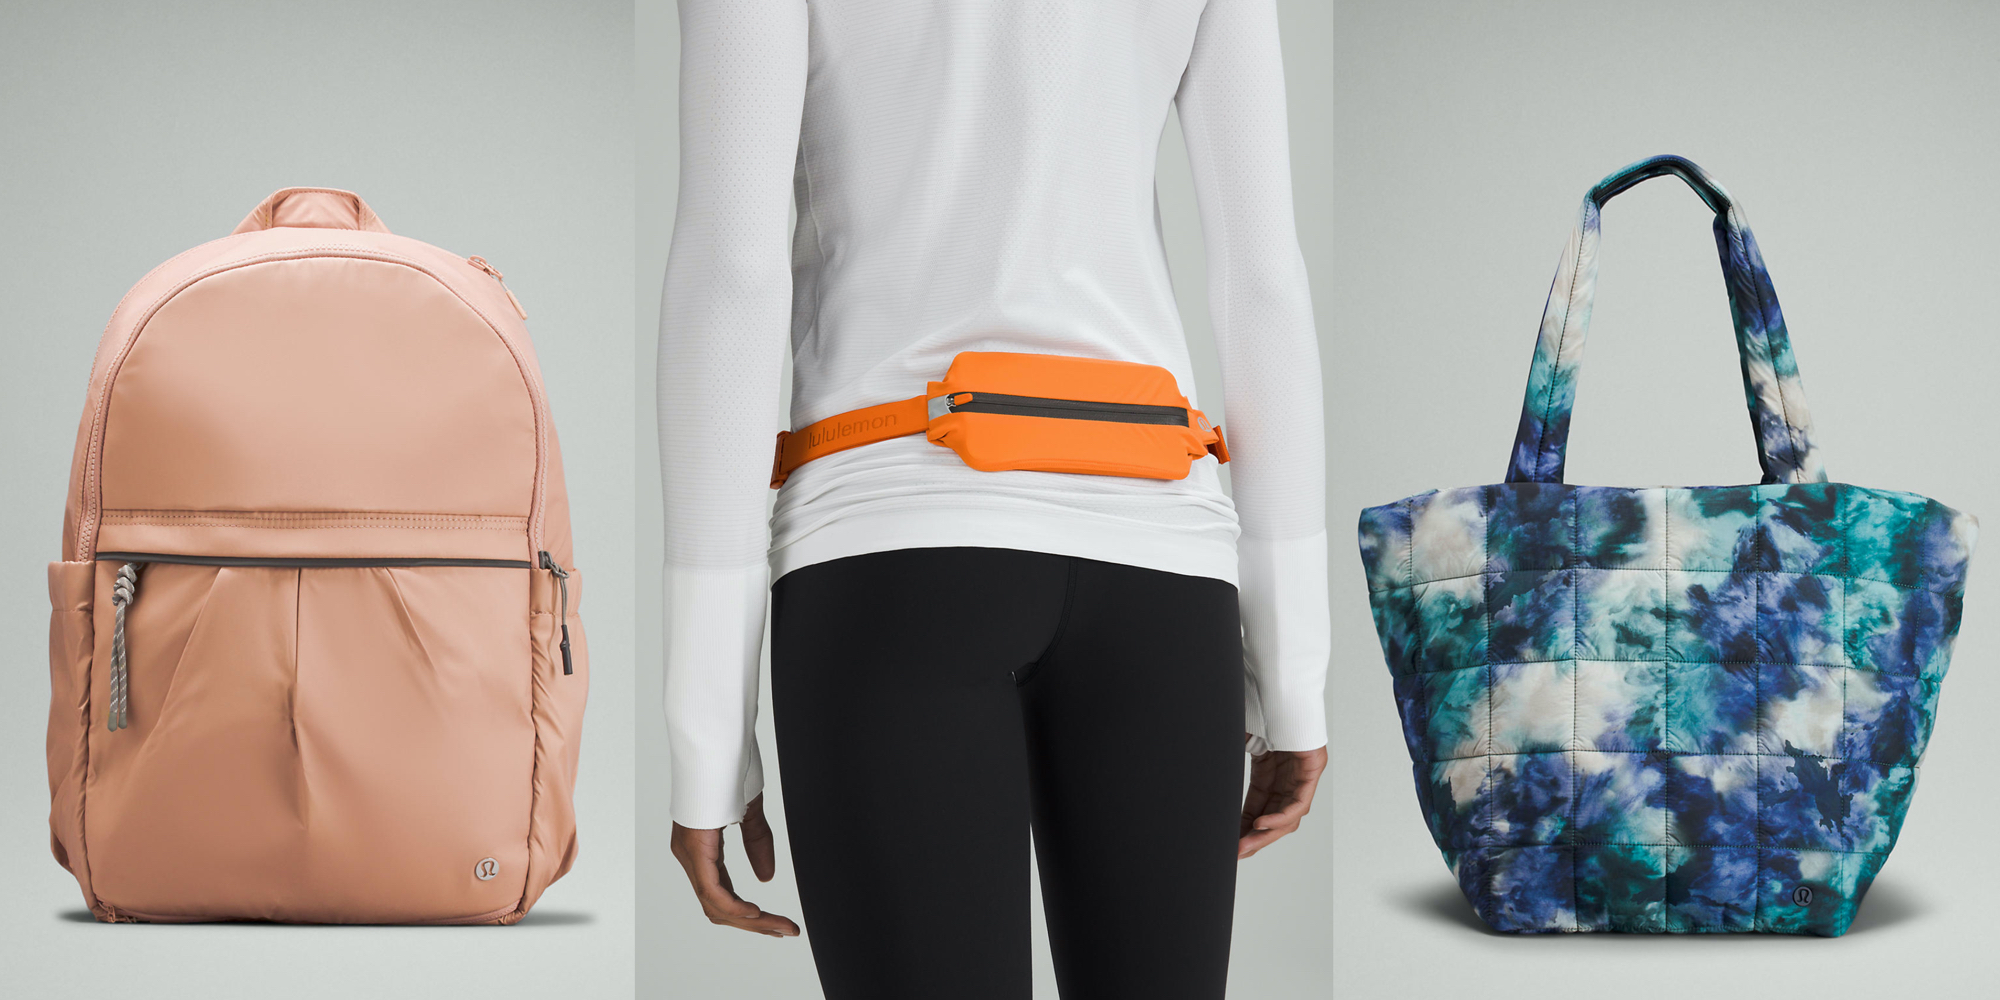 We Made Too Much Sale: Lululemon bags on sale this week (10/28/22) 